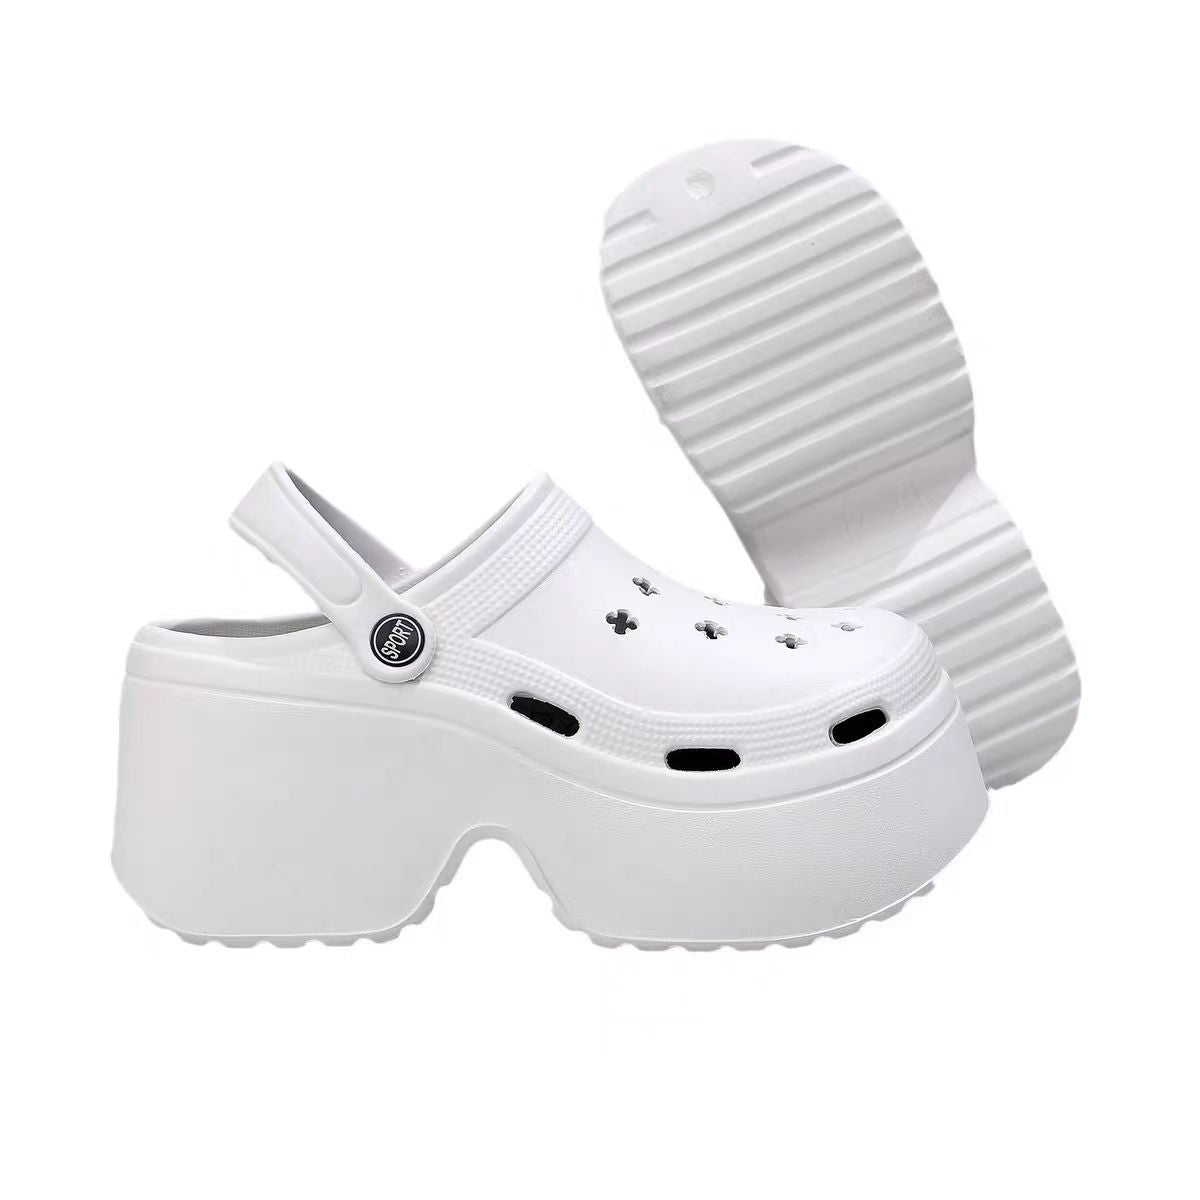 Belifi Thick Soled Breathable Anti Slip Beach Slippers